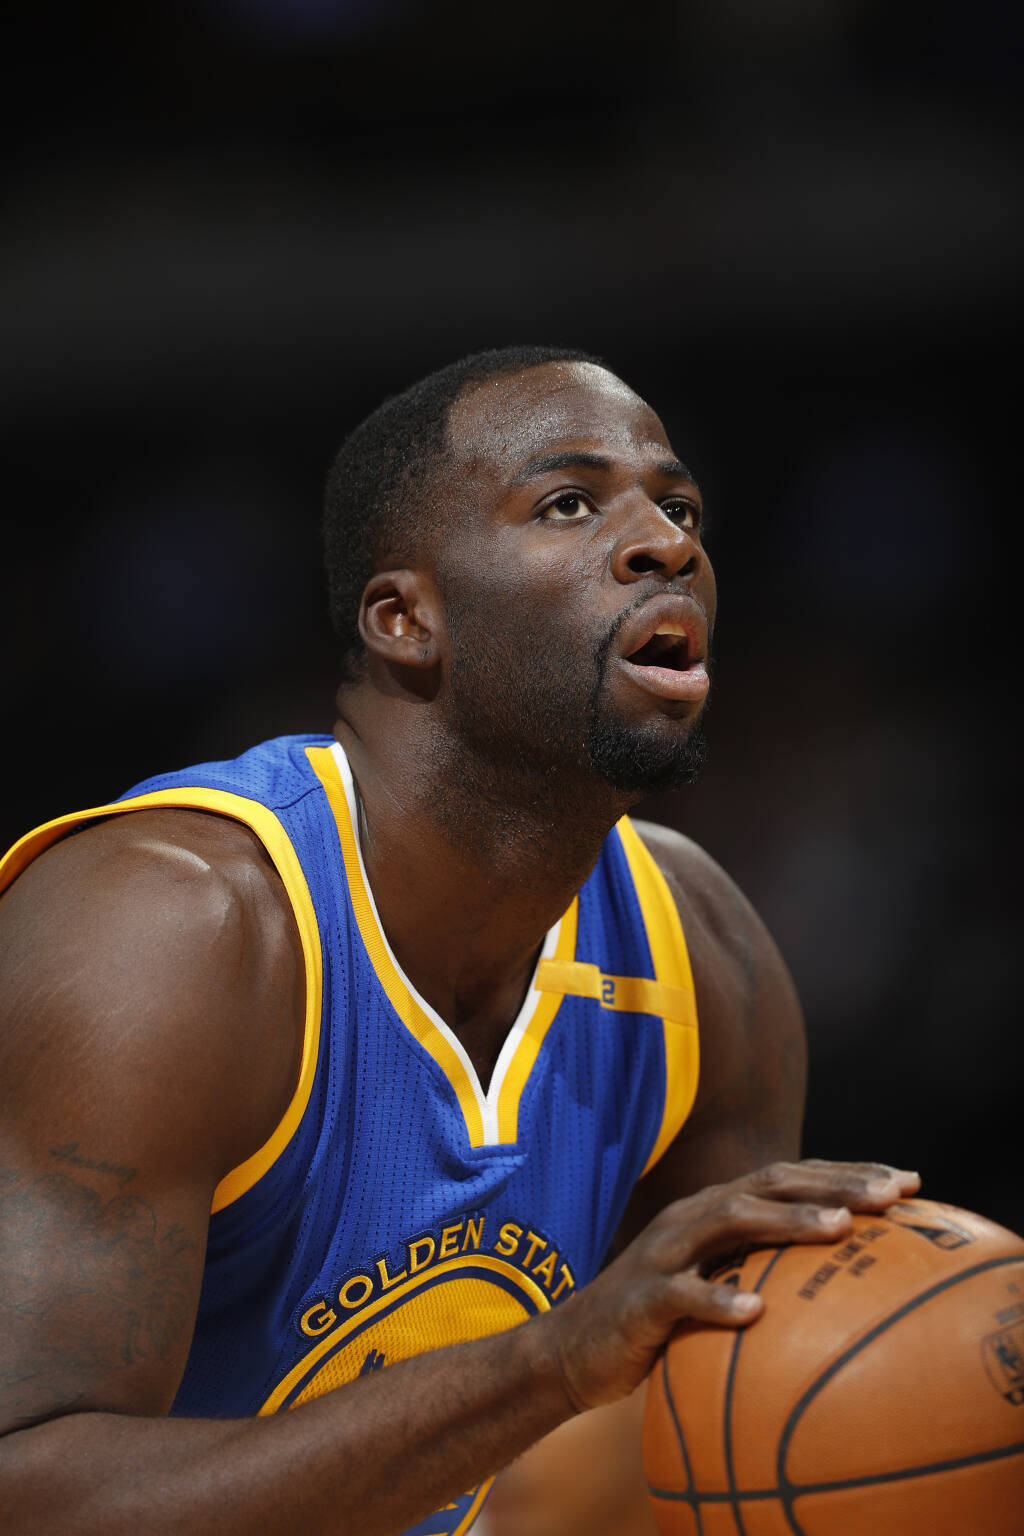 Draymond Green appears to want $100 million contract in free agency